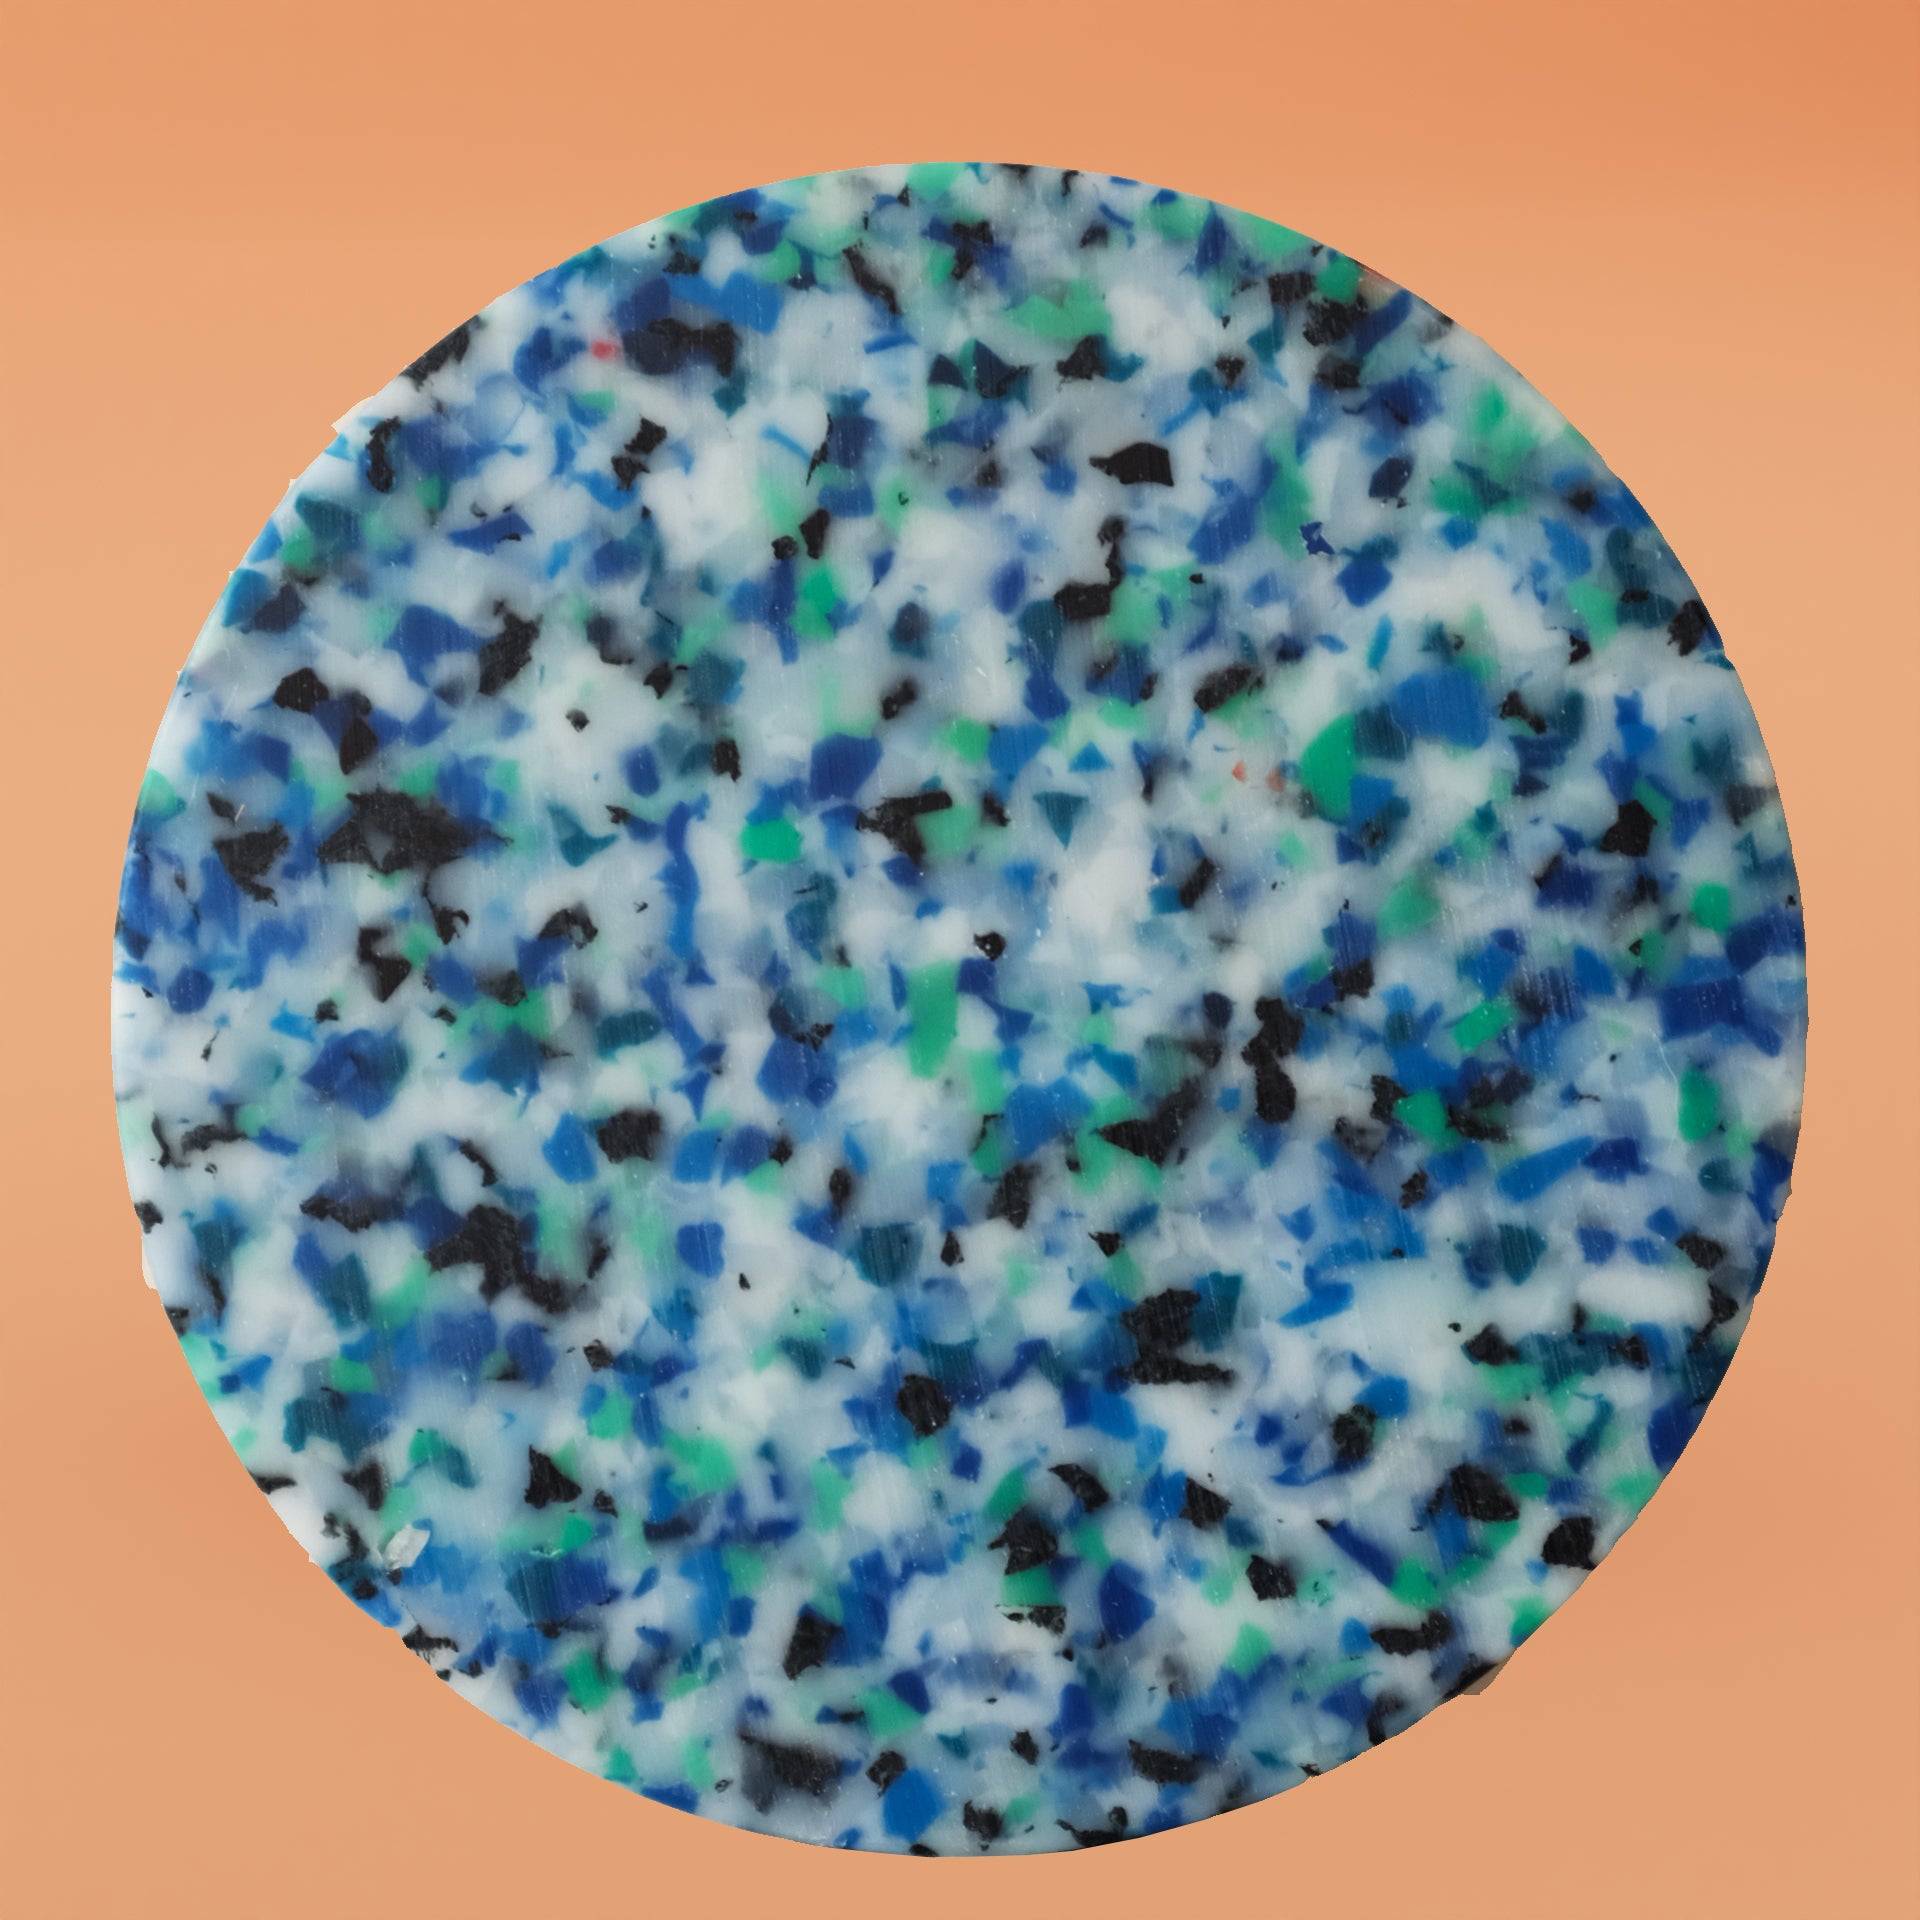 BLUE SMALL CIRCLE CHARCUTERIE CUTTING BOARD BY THE MINIMONO PROJECT - BRAND FOR ECO FRIENDLY - PLAYFUL - MULTI FUNCTIONAL - SUSTAINABLE - HIGH QUALITY - DESIGN FURNITURE FROM RECYCLED PLASTIC FOR BOTH ADULT AND CHILDREN MADE IN BERLIN GERMANY